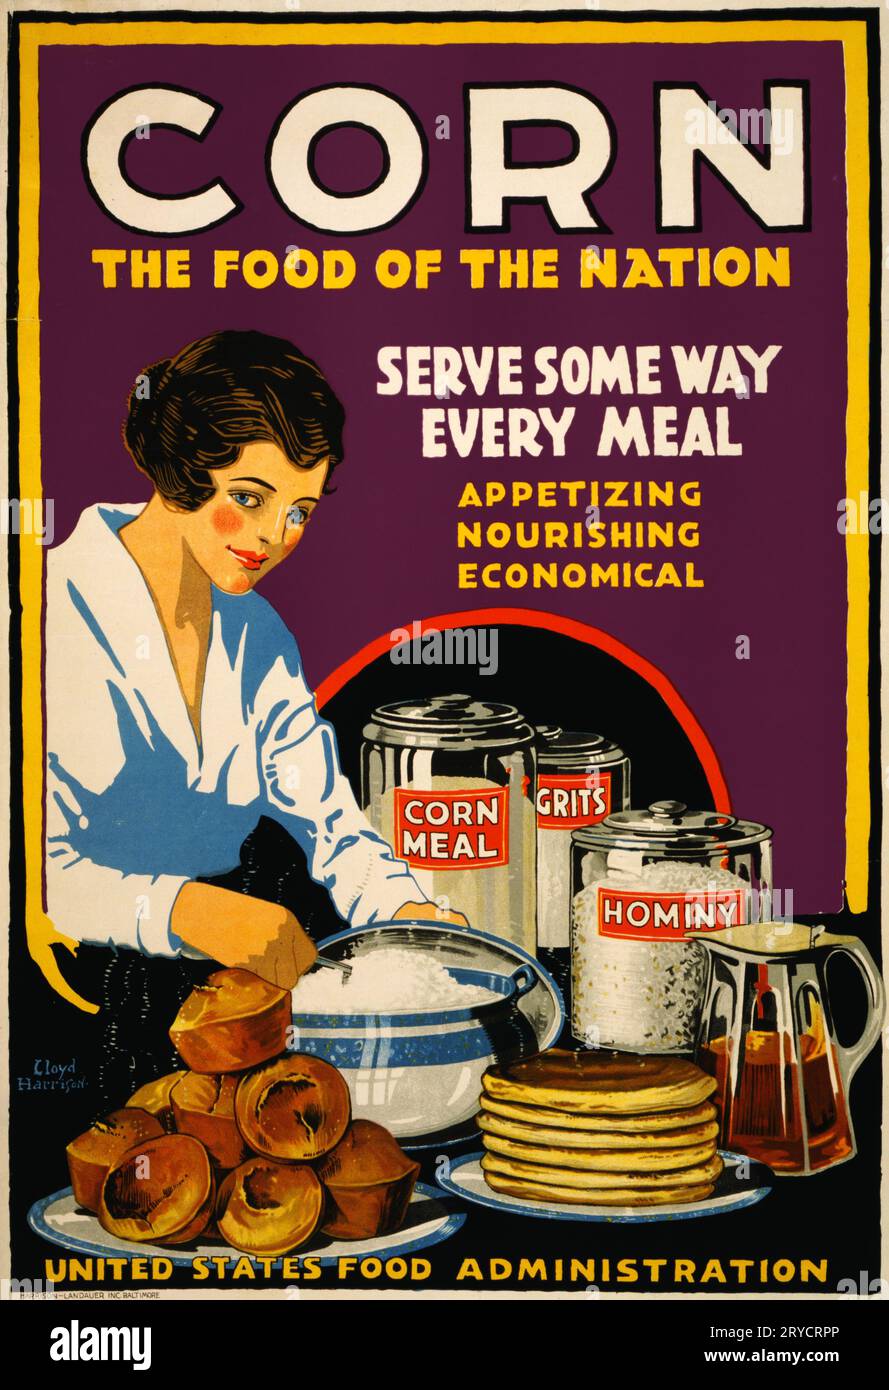 Corn, the food of the nation, US Food Administration poster, 1918  Corn, the food of the nation. Serve some way every meal: appetizing, nourishing, economical. Poster showing a woman serving muffins, pancakes, and grits, with cannisters on the table labeled corn meal, grits, and hominy. World War 1 poster for the United States Food Administration by Lloyd Harrison, 1918. Stock Photo